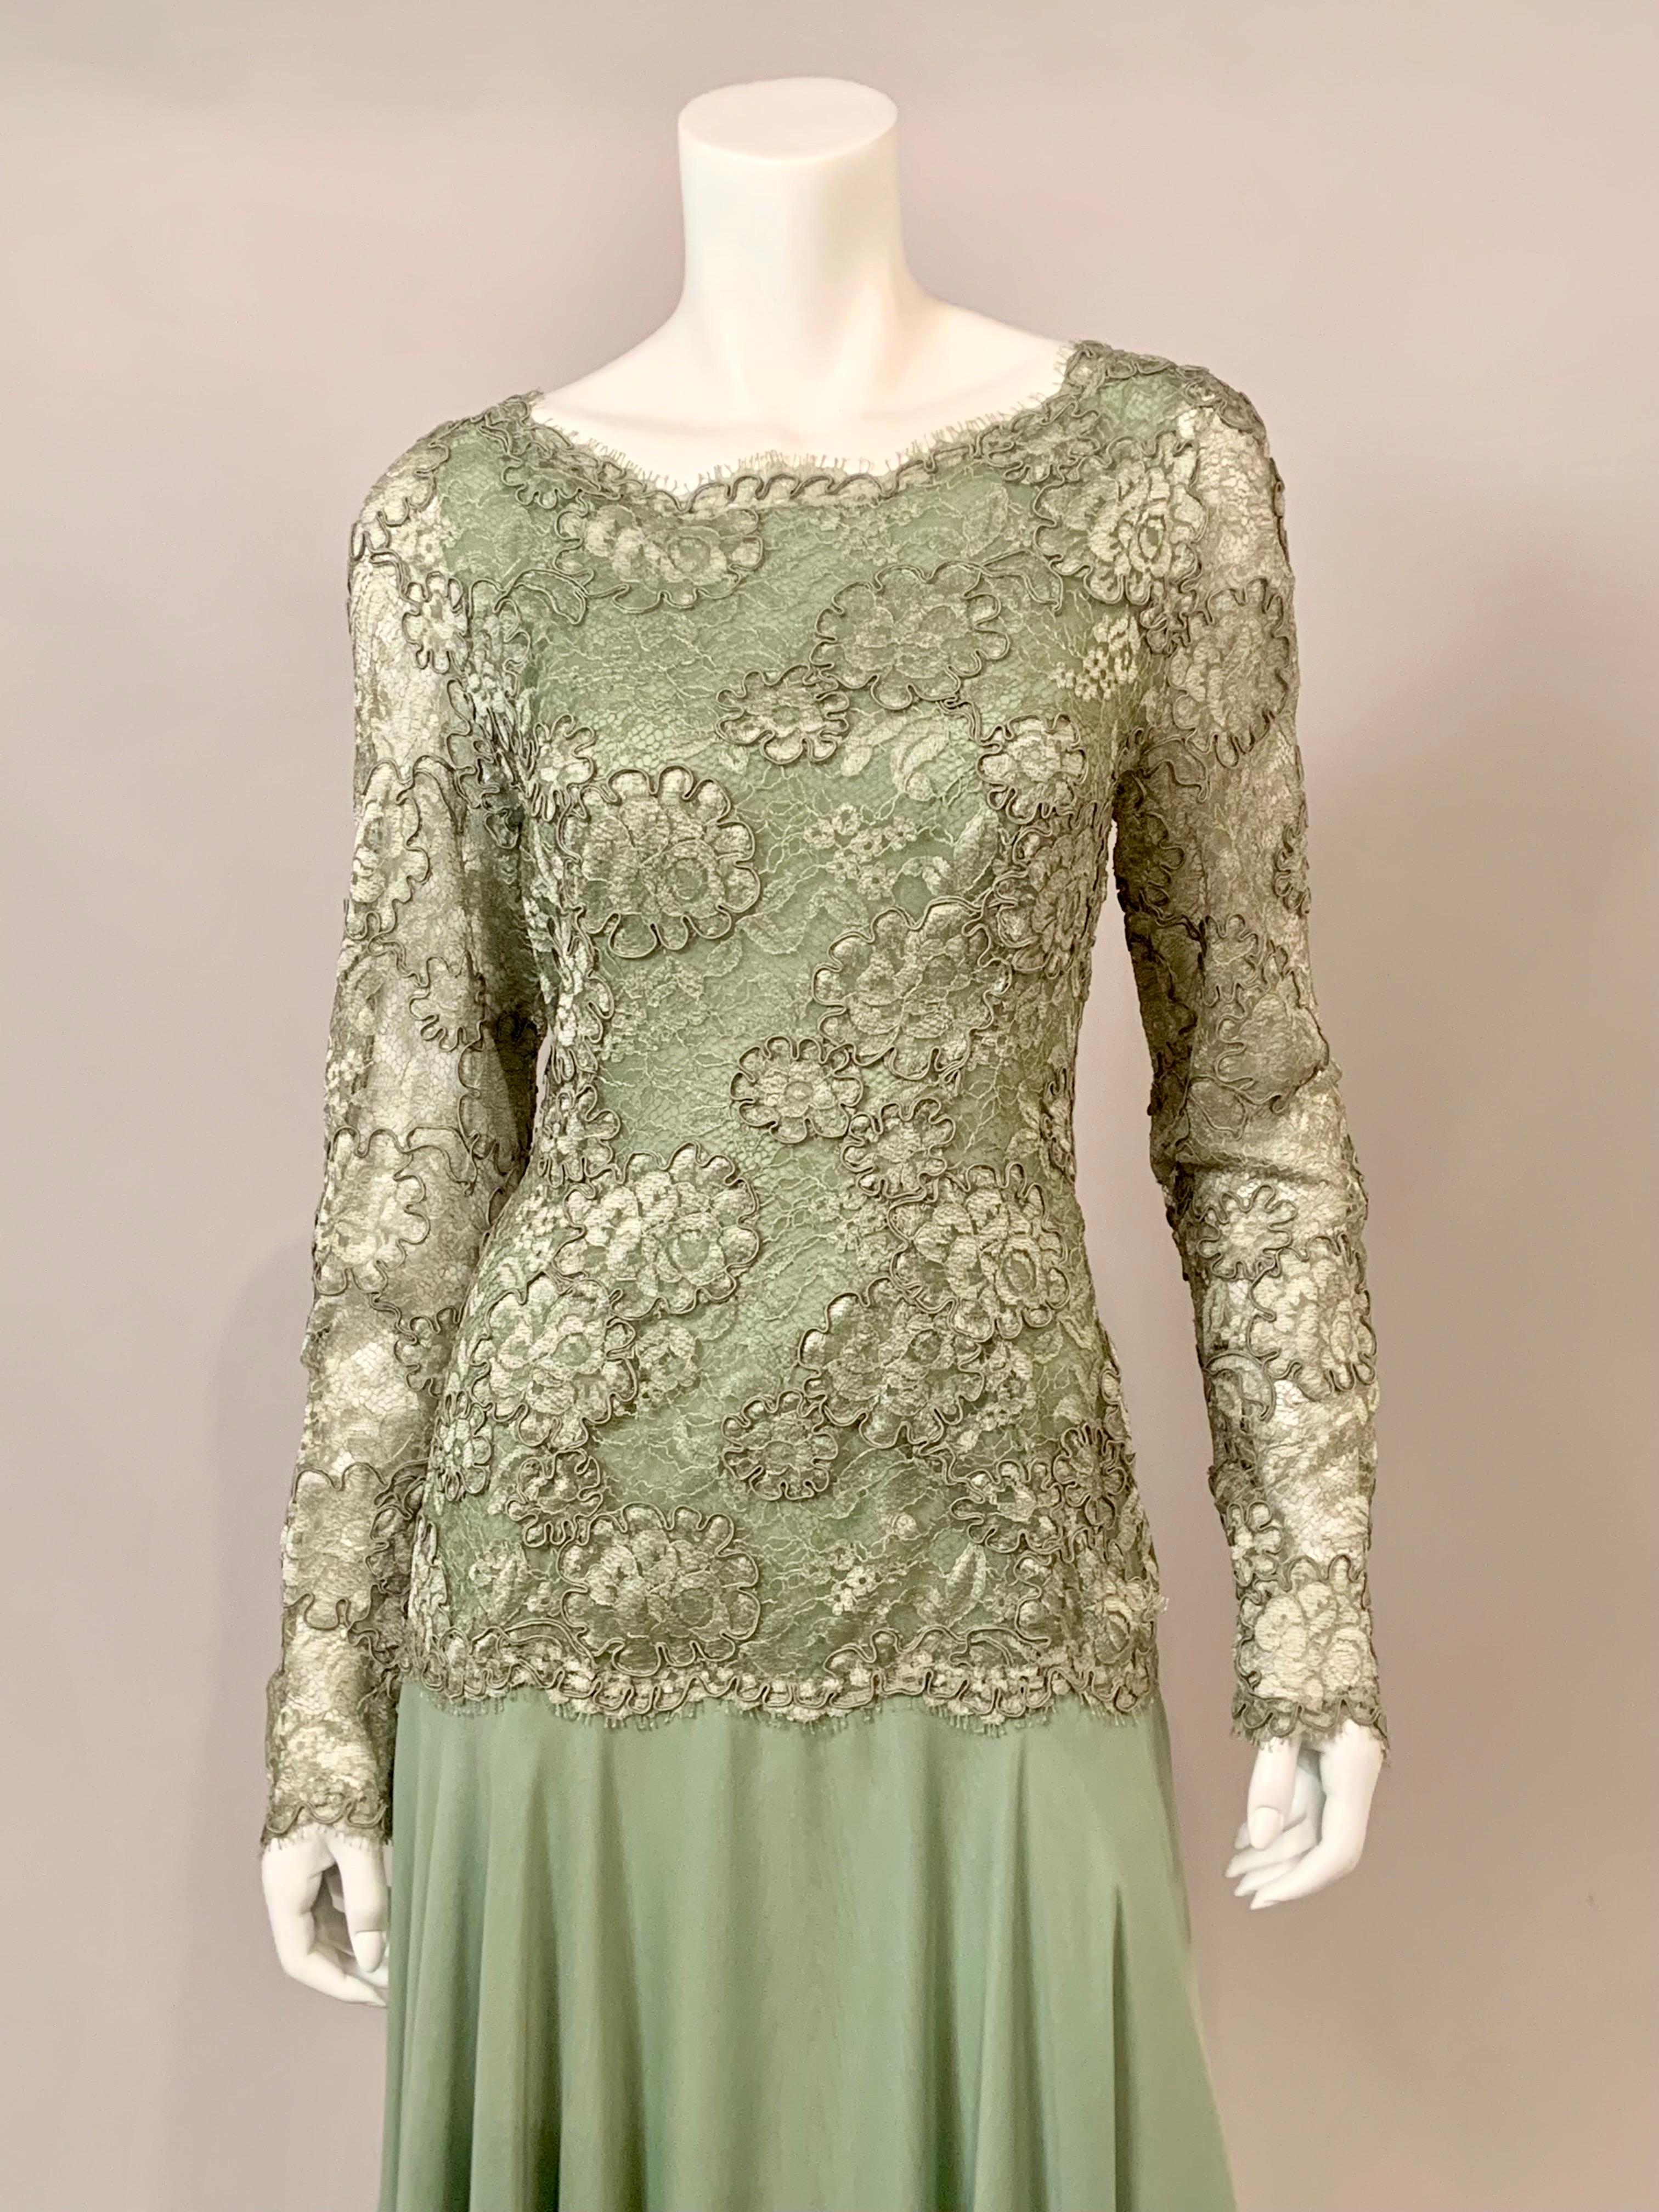 John Anthony has designed an elegant and feminine evening dress combining  a hip length pale green lace bodice with a matching green skirt made from four layers of silk chiffon.  The dress has fabric covered snaps at the wrists and a center back